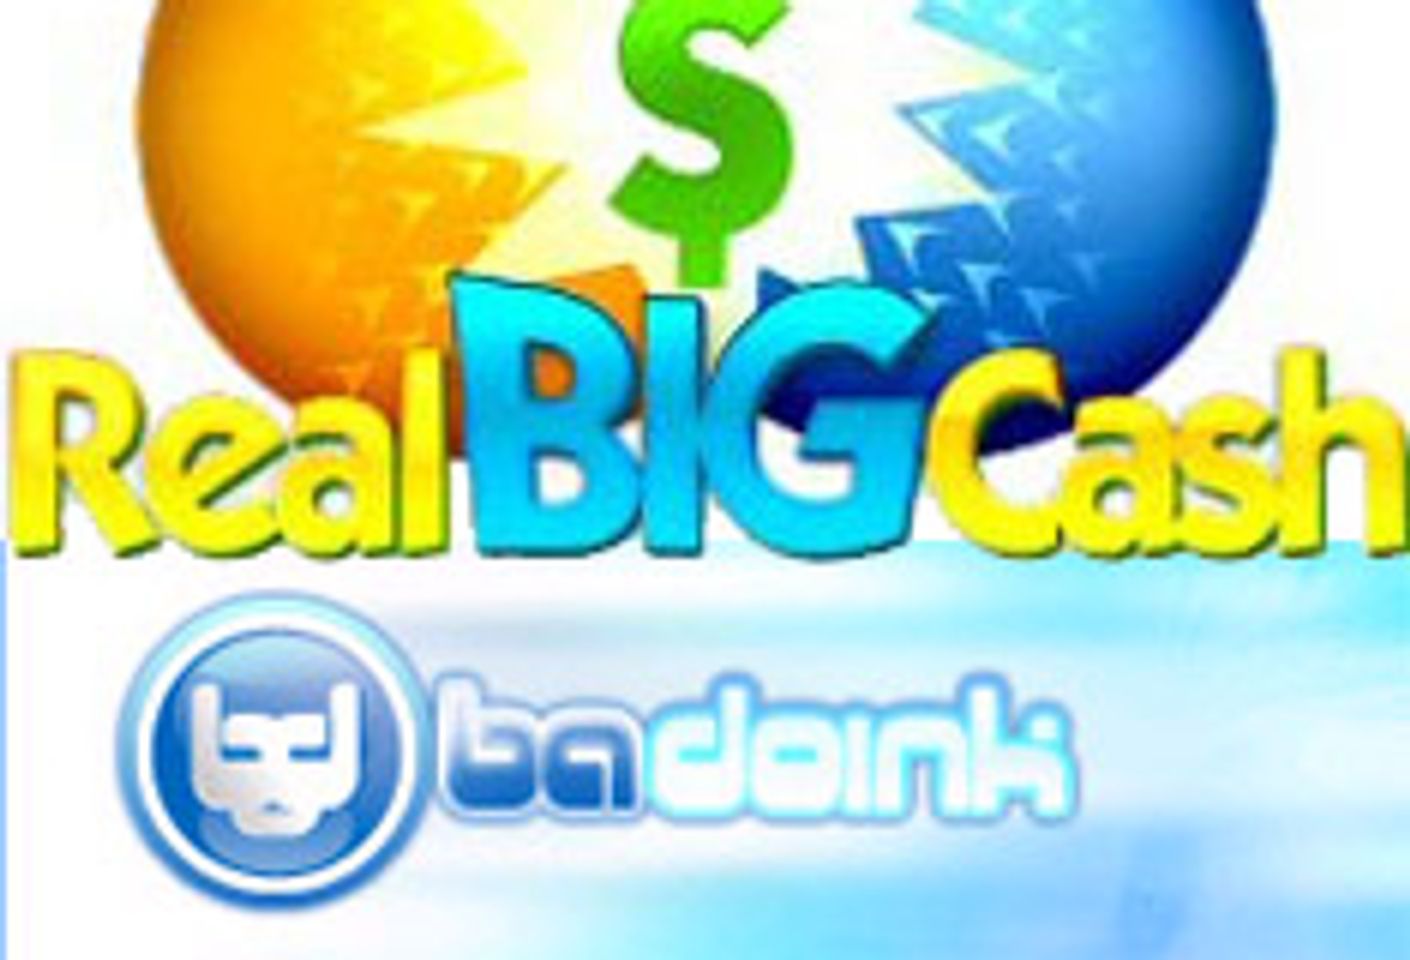 RealBigCash Partners With Adult P2P Network BaDoink